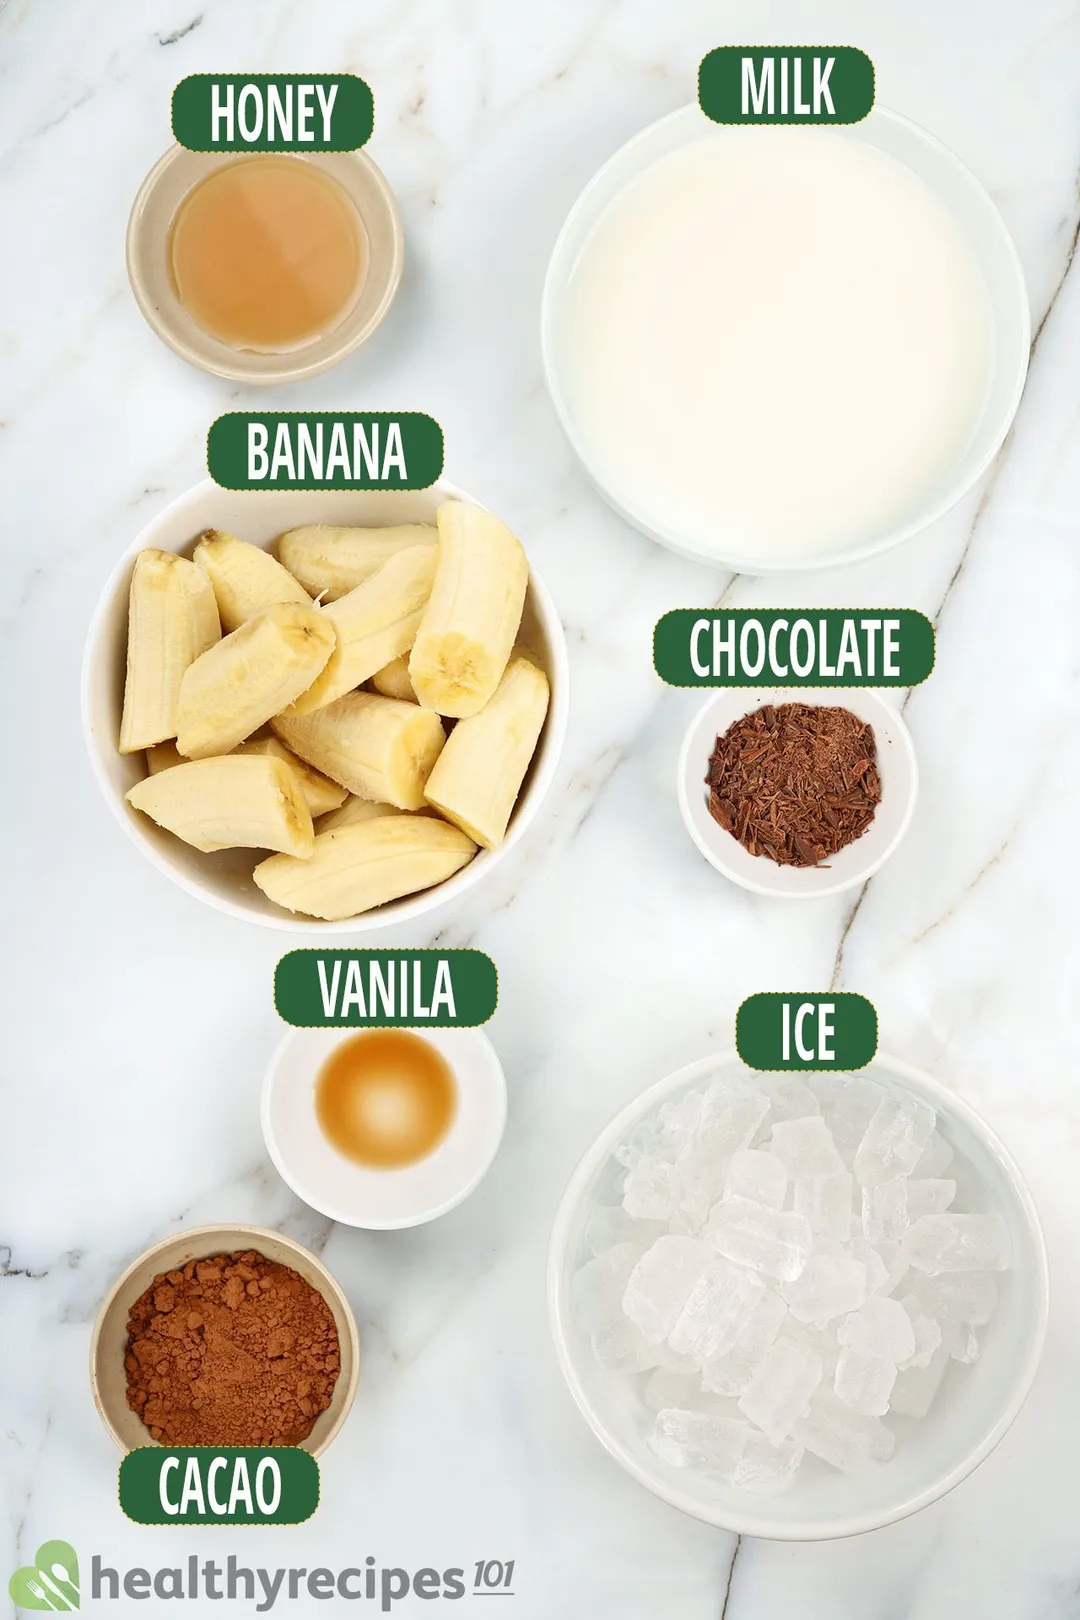 Ingredients for chocolate banana smoothie, including bowls of sliced bananas, cocoa, minced chocolate, ice, and other essentials.